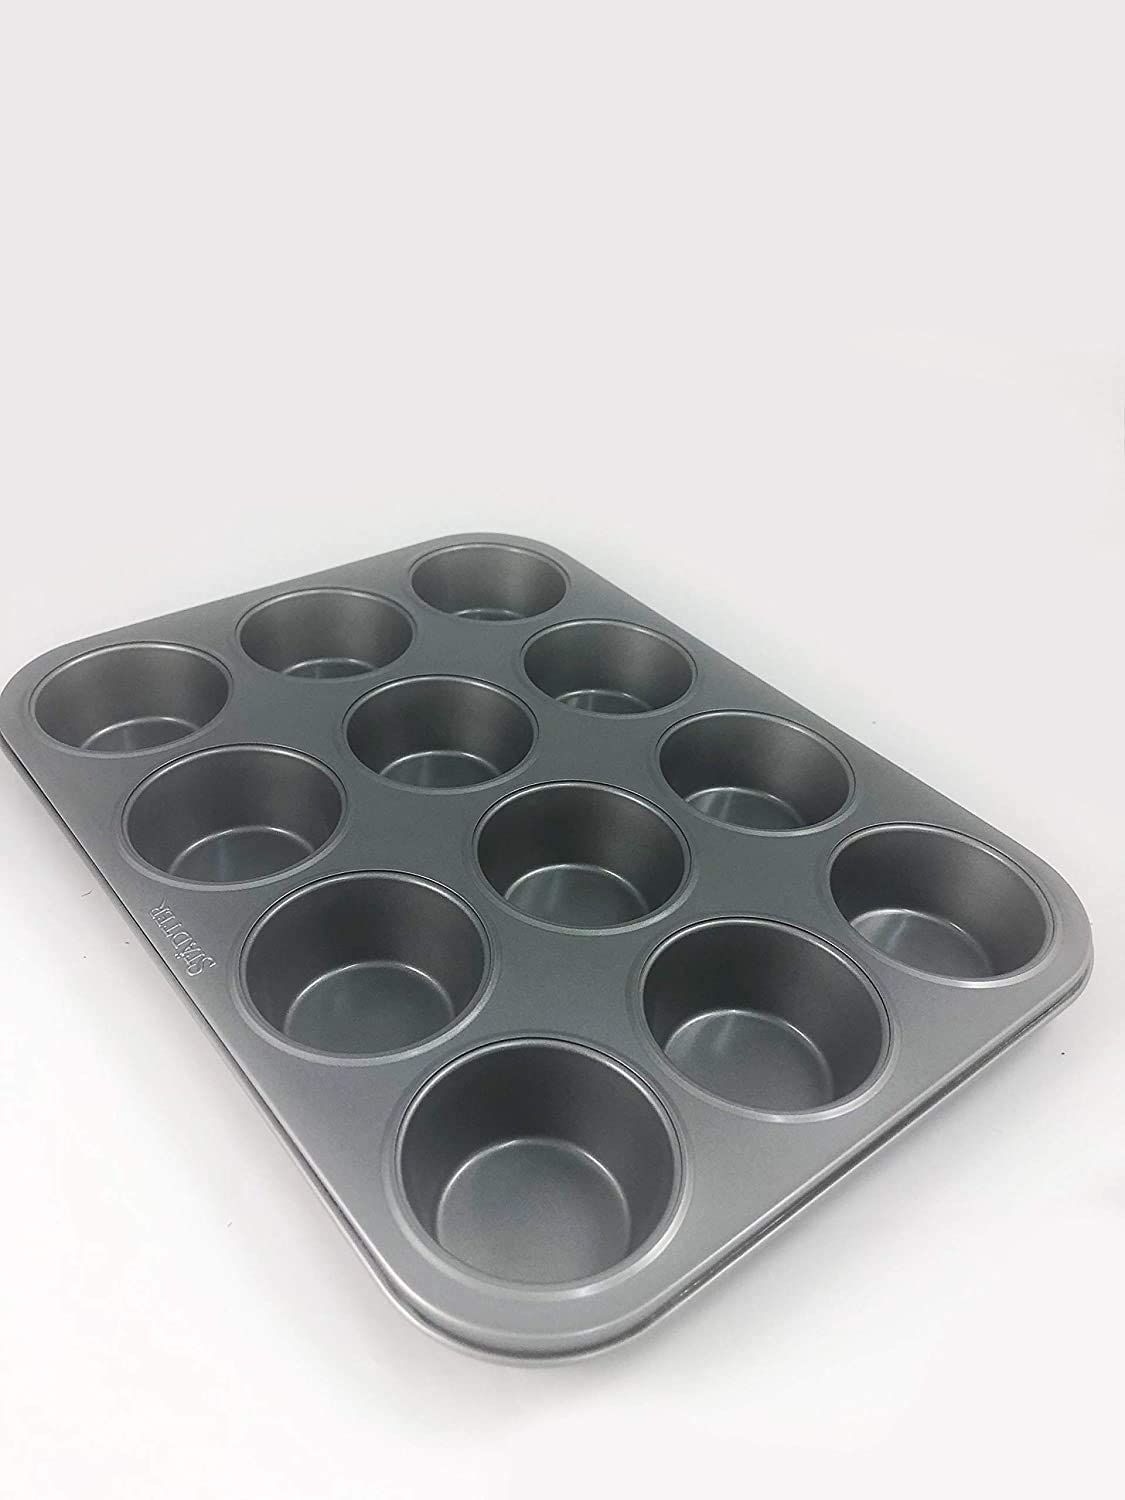 Staedter Städter Non-Stick Muffin Baking Tin with 12 Muffin